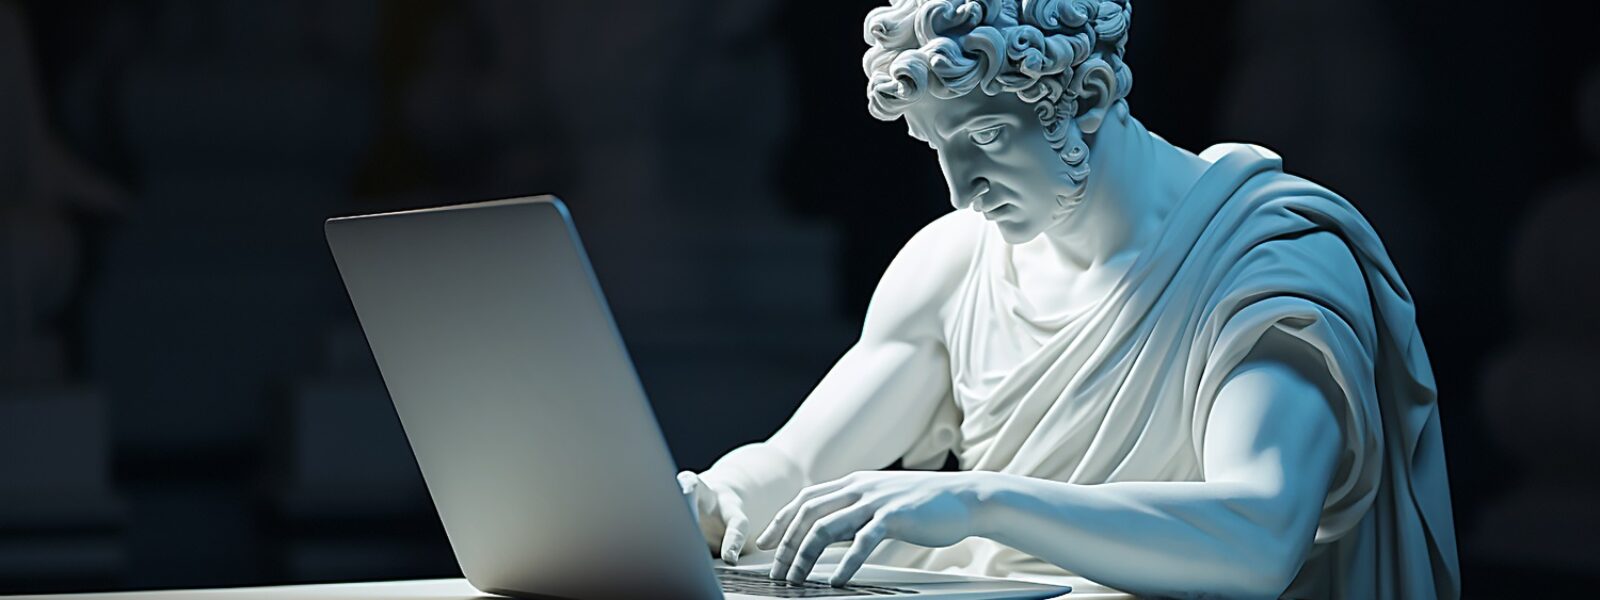 AdobeStock_675645725_Ancient sculpture working with laptop